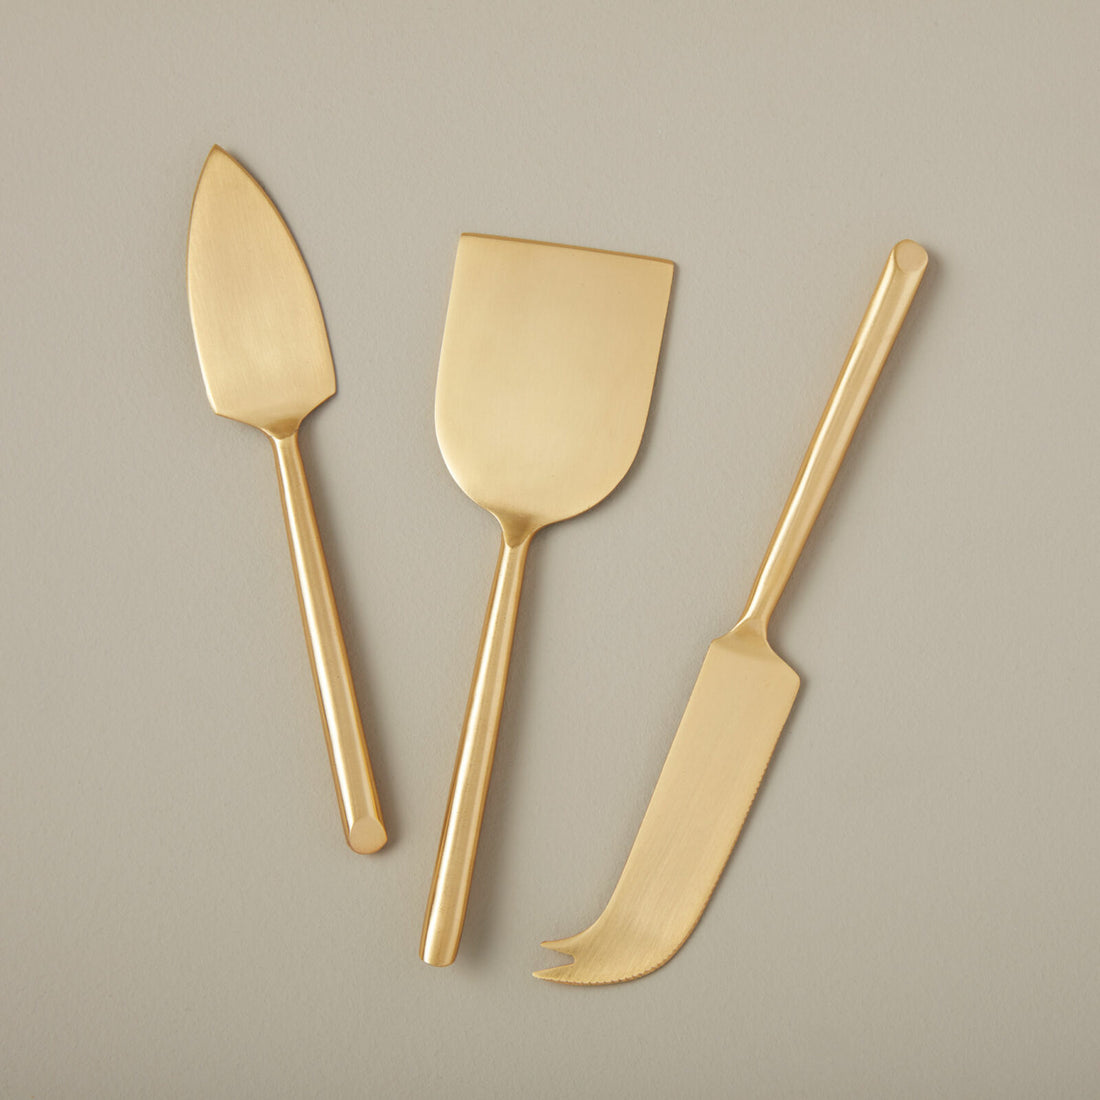 Three Matte Gold Cheese Spreaders Set of 3 by Be Home arranged neatly on a light background.